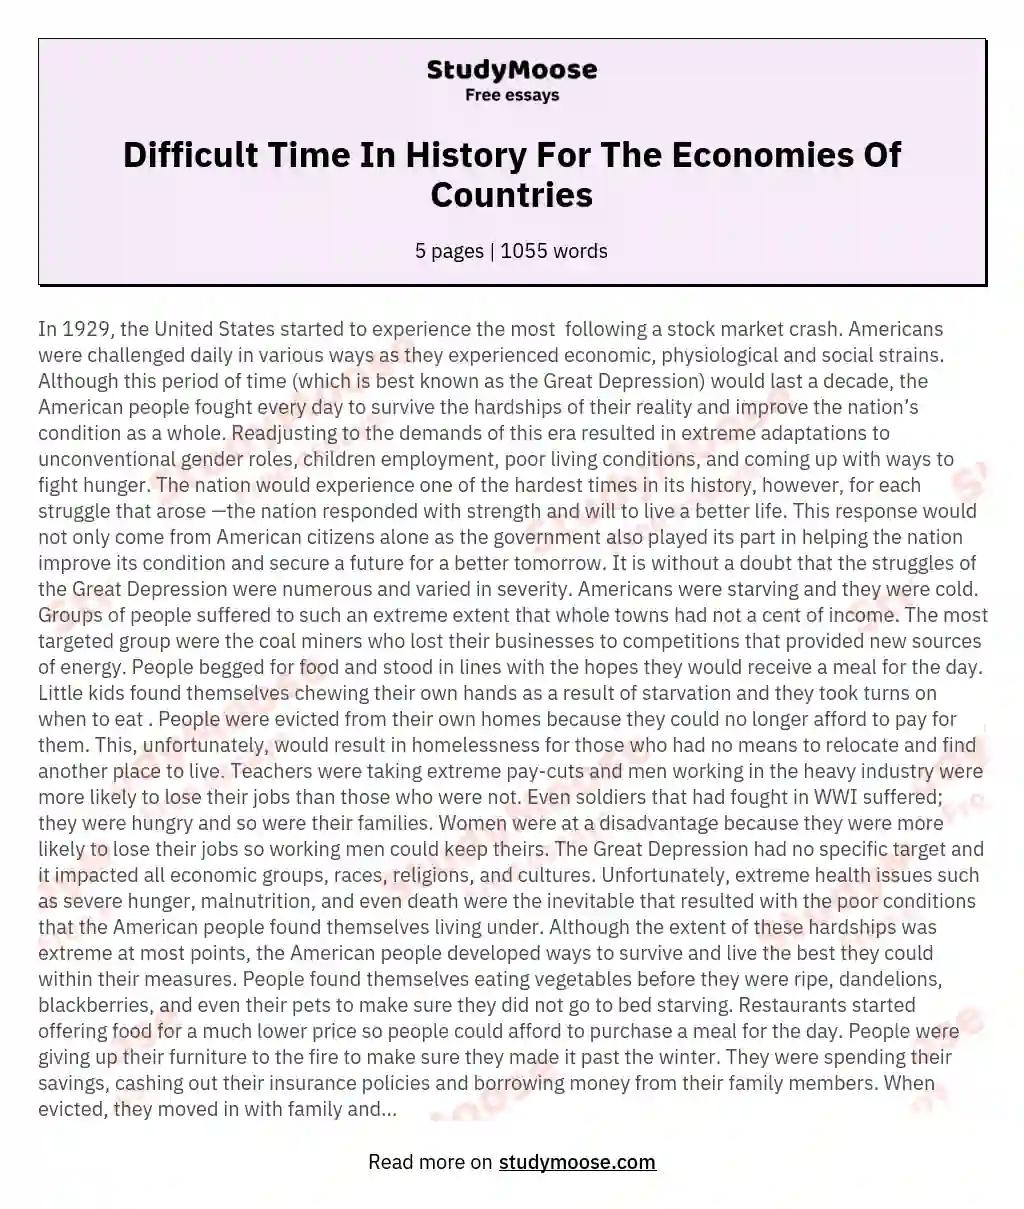 Difficult Time In History For The Economies Of Countries essay